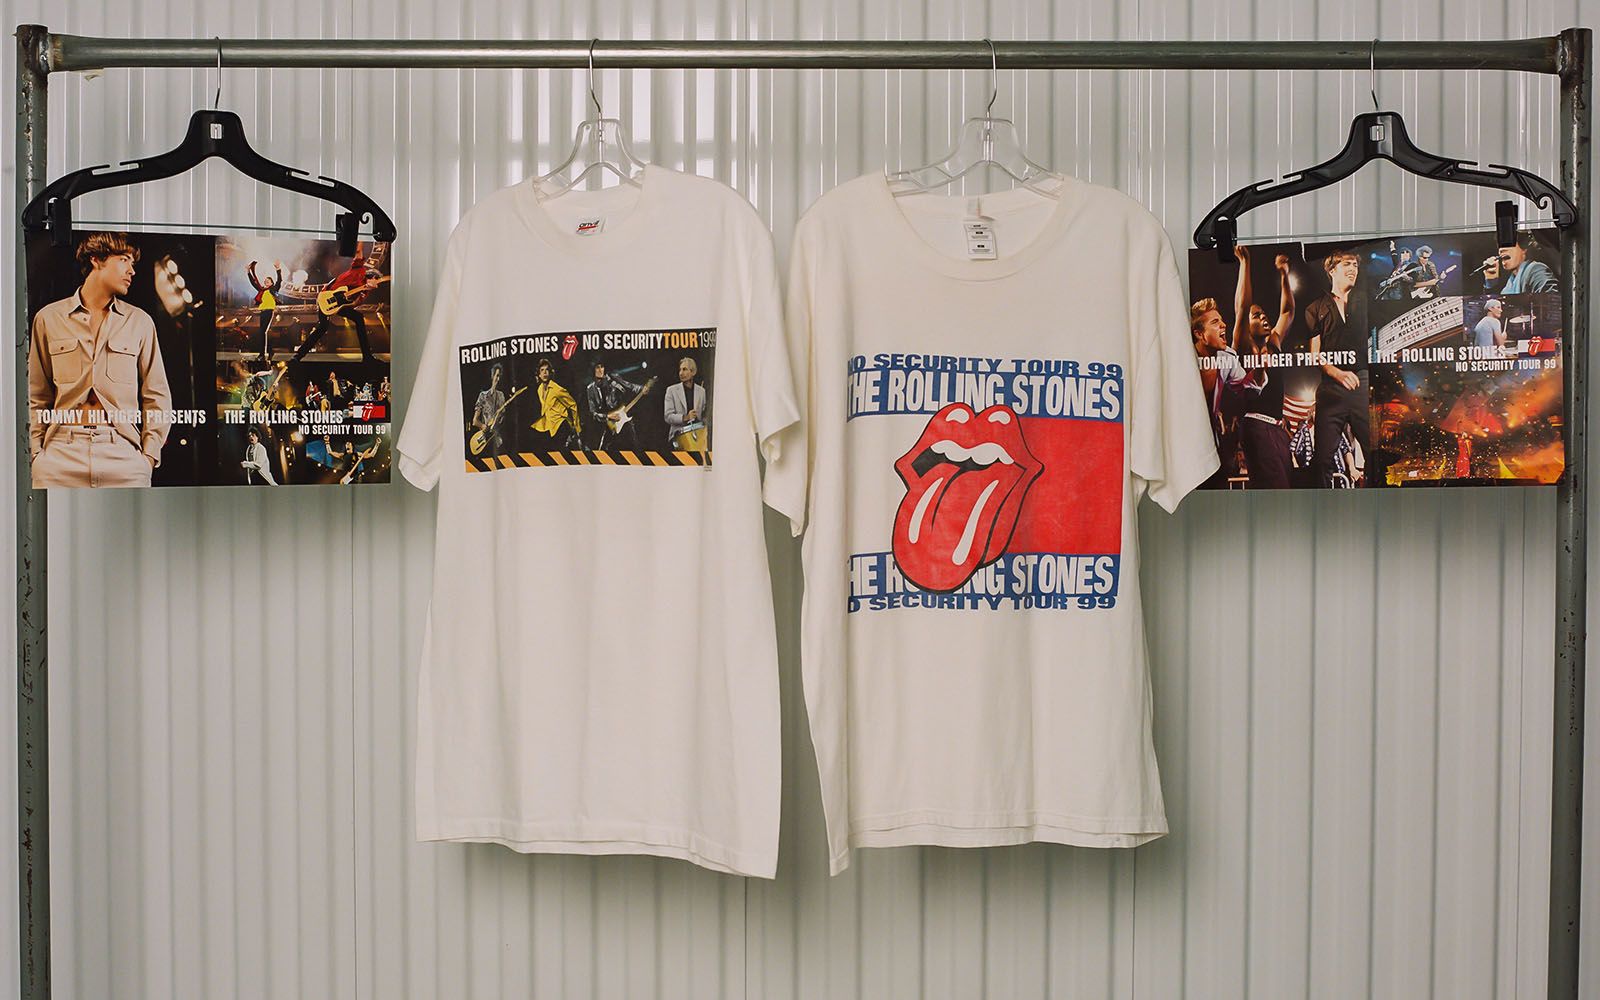 (Left, right) Designed to look like concert posters, the ad campaigns featured models wearing Tommy Hilfiger product with bands playing live. (Center) Tommy Hilfiger sponsored the Rolling Stones “No Security” tour in 1999, part of Tommy’s 'Year of Music' in which he also sponsored several other concert tours.